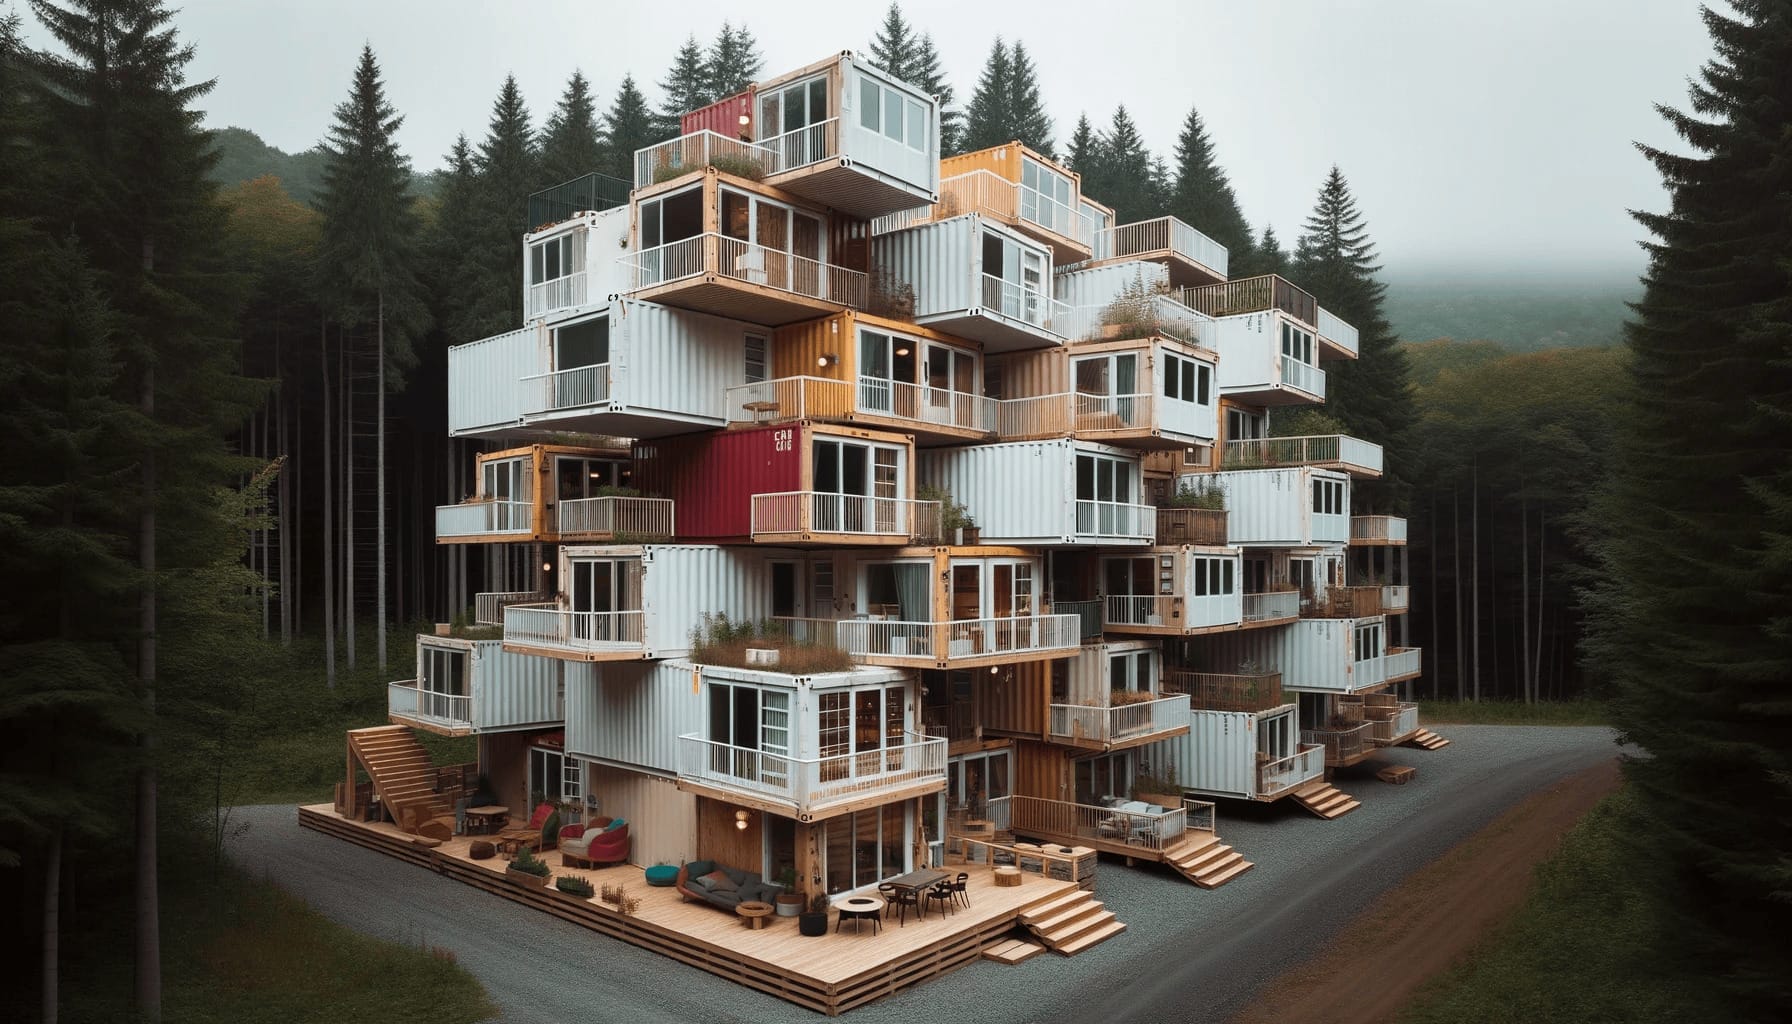 DALL·E 2023 10 19 09.15.25 Photo of a multi story container cabin complex in a forest setting. The containers are stacked creatively with balconies and terraces adding to the a